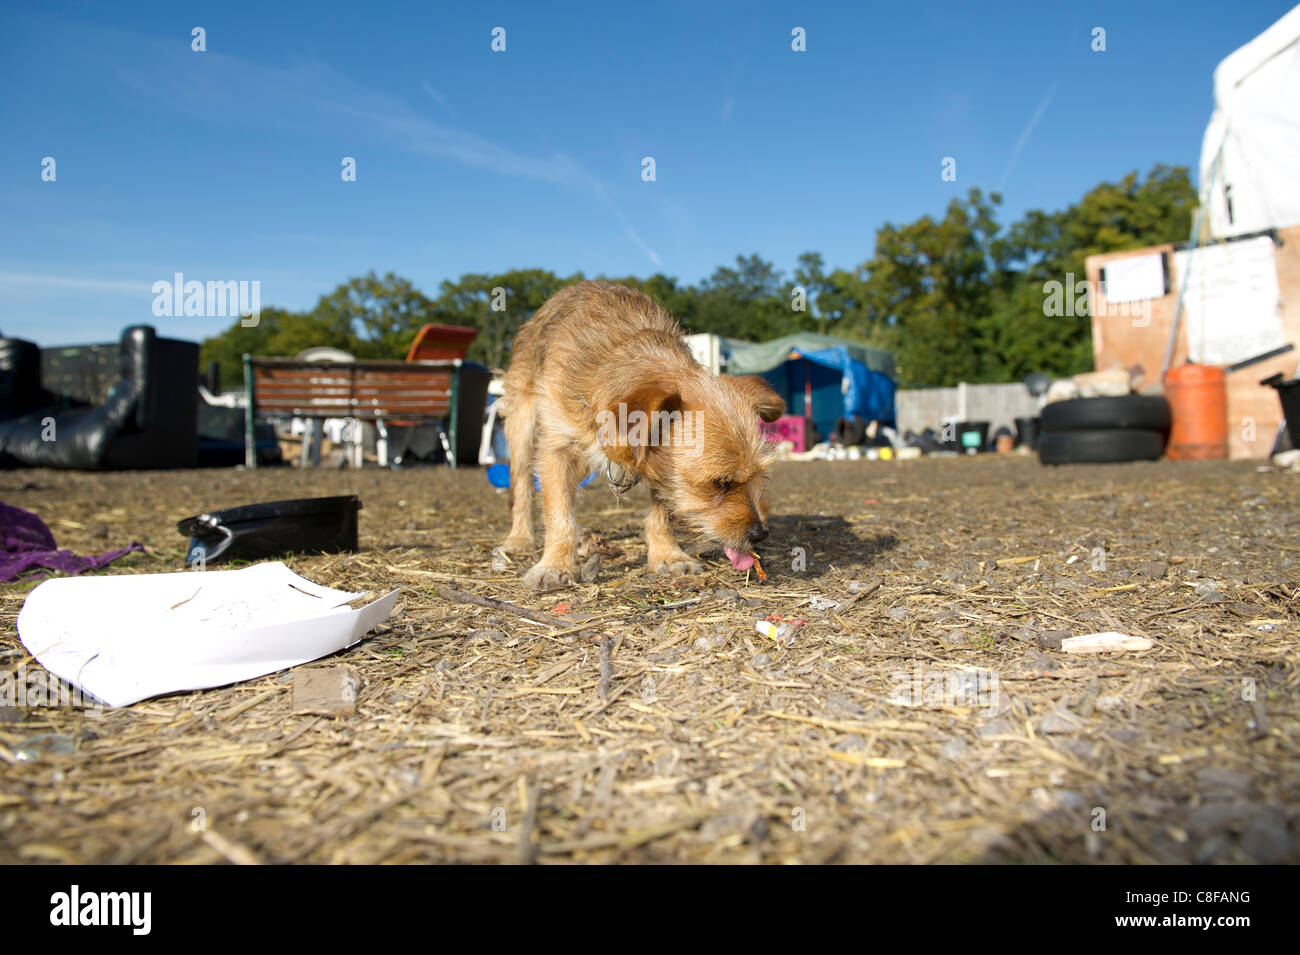 21st October 2011. A traveller's dog at Dale Farm near Basildon, Essex, scavenging for scraps around the abandoned eating area set up by the protesters who have now left. After a ten year legal battle the travellers are now in the process of being evicted from the illegal plots on the six acre trave Stock Photo